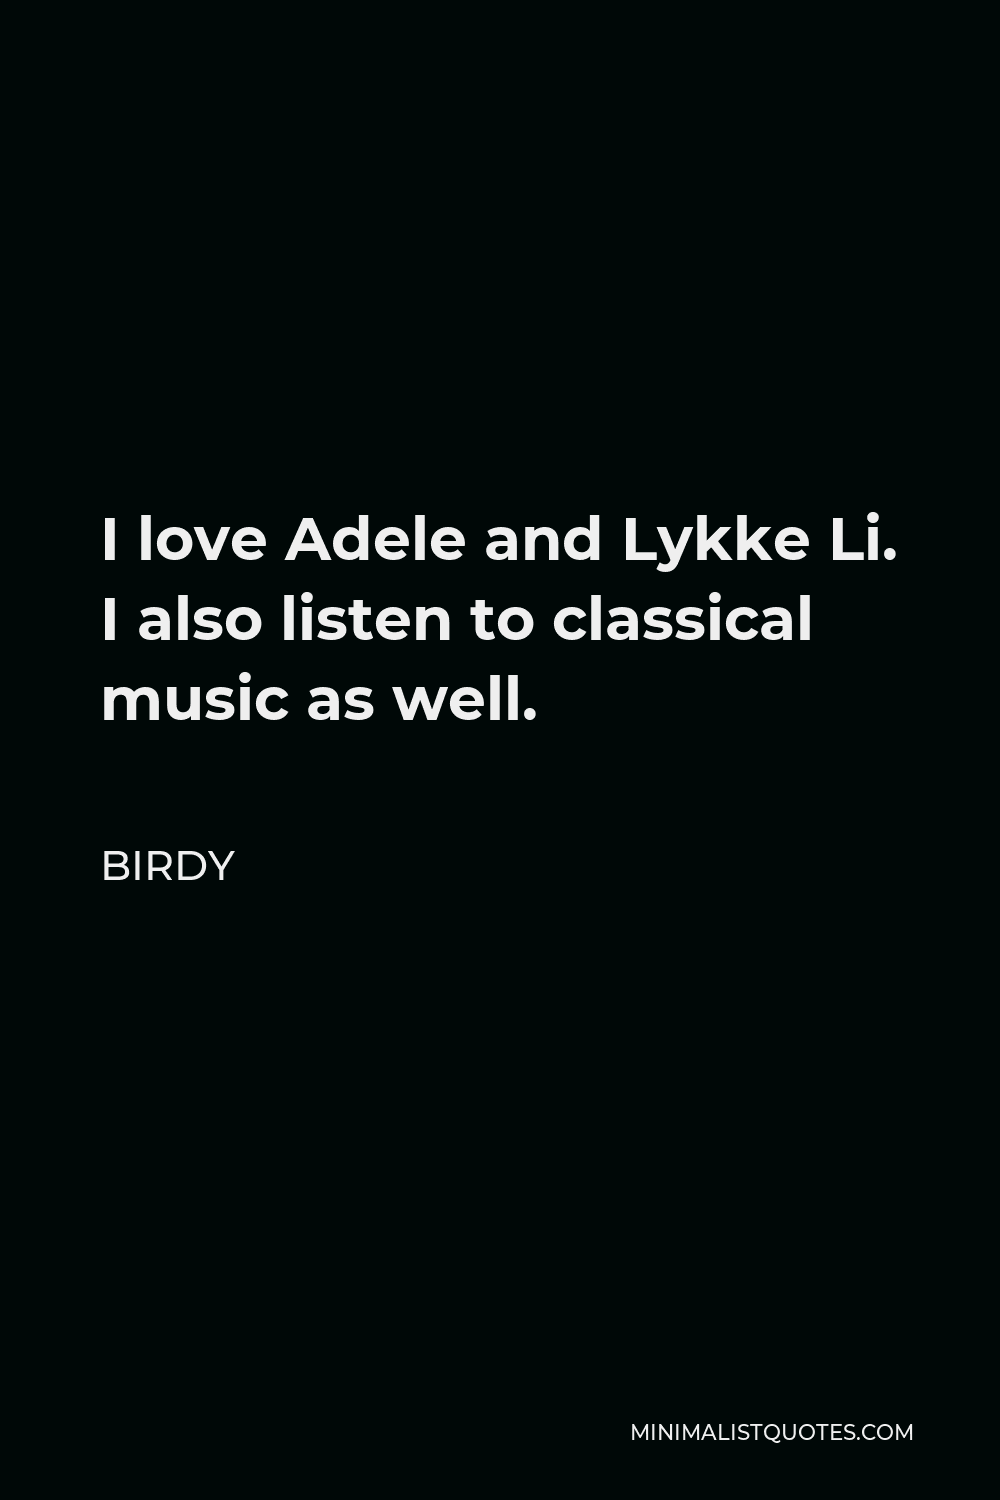 Birdy Quote - I love Adele and Lykke Li. I also listen to classical music as well.